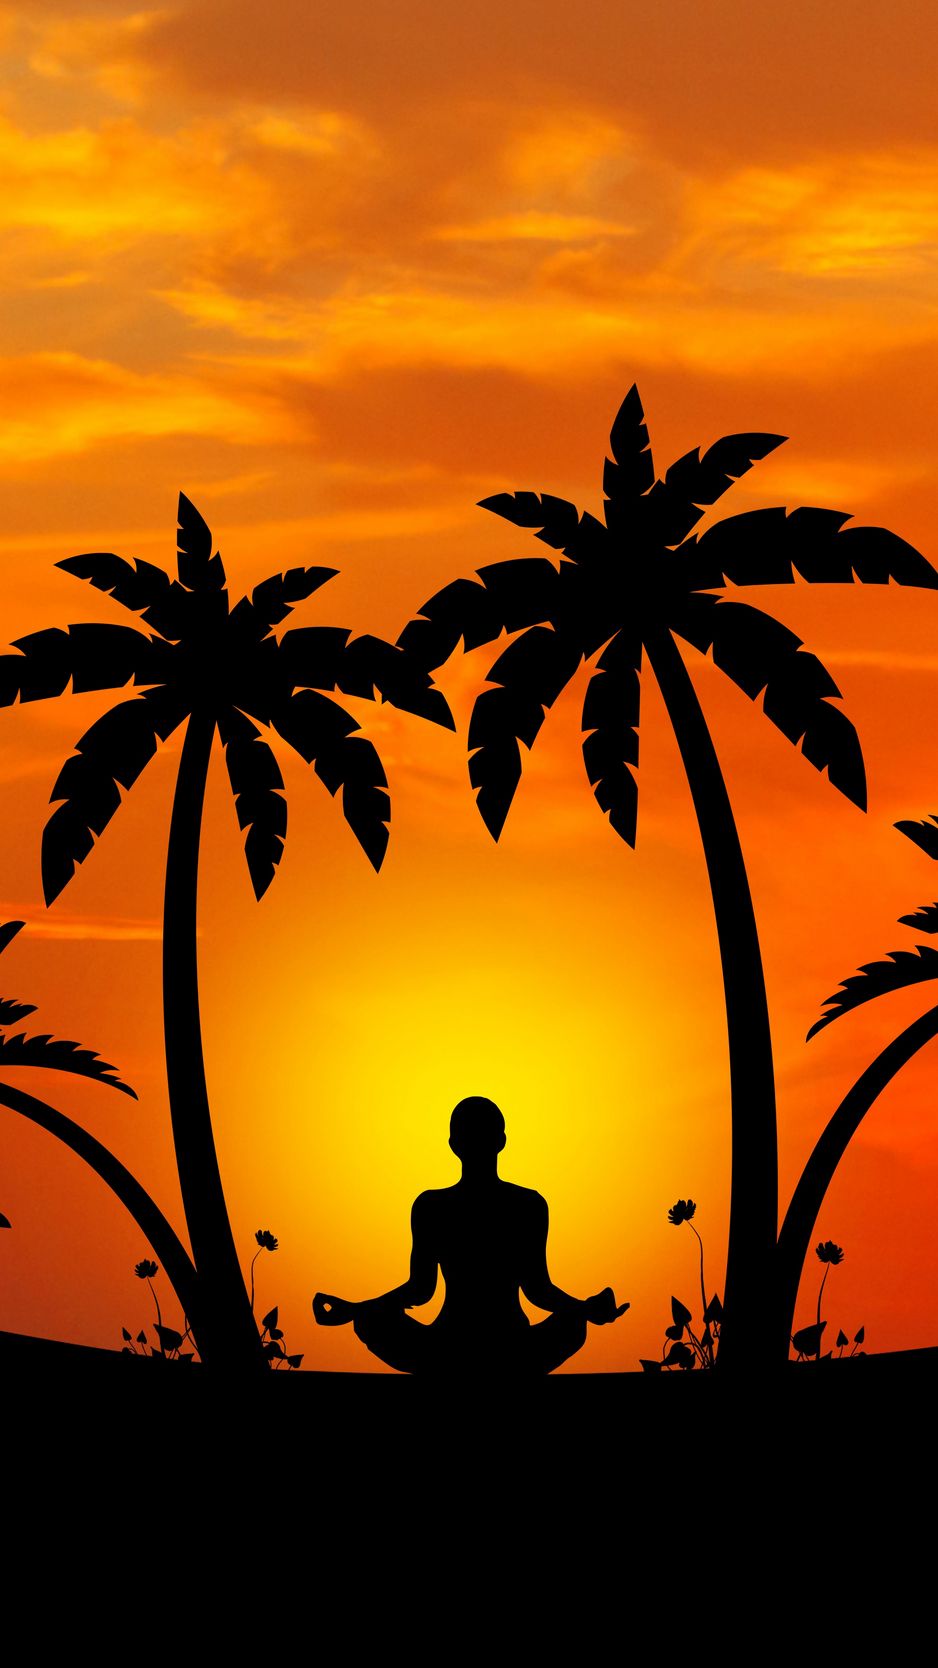 Download wallpaper 938x1668 meditation, yoga, silhouette, palm trees,  harmony iphone 8/7/6s/6 for parallax hd background